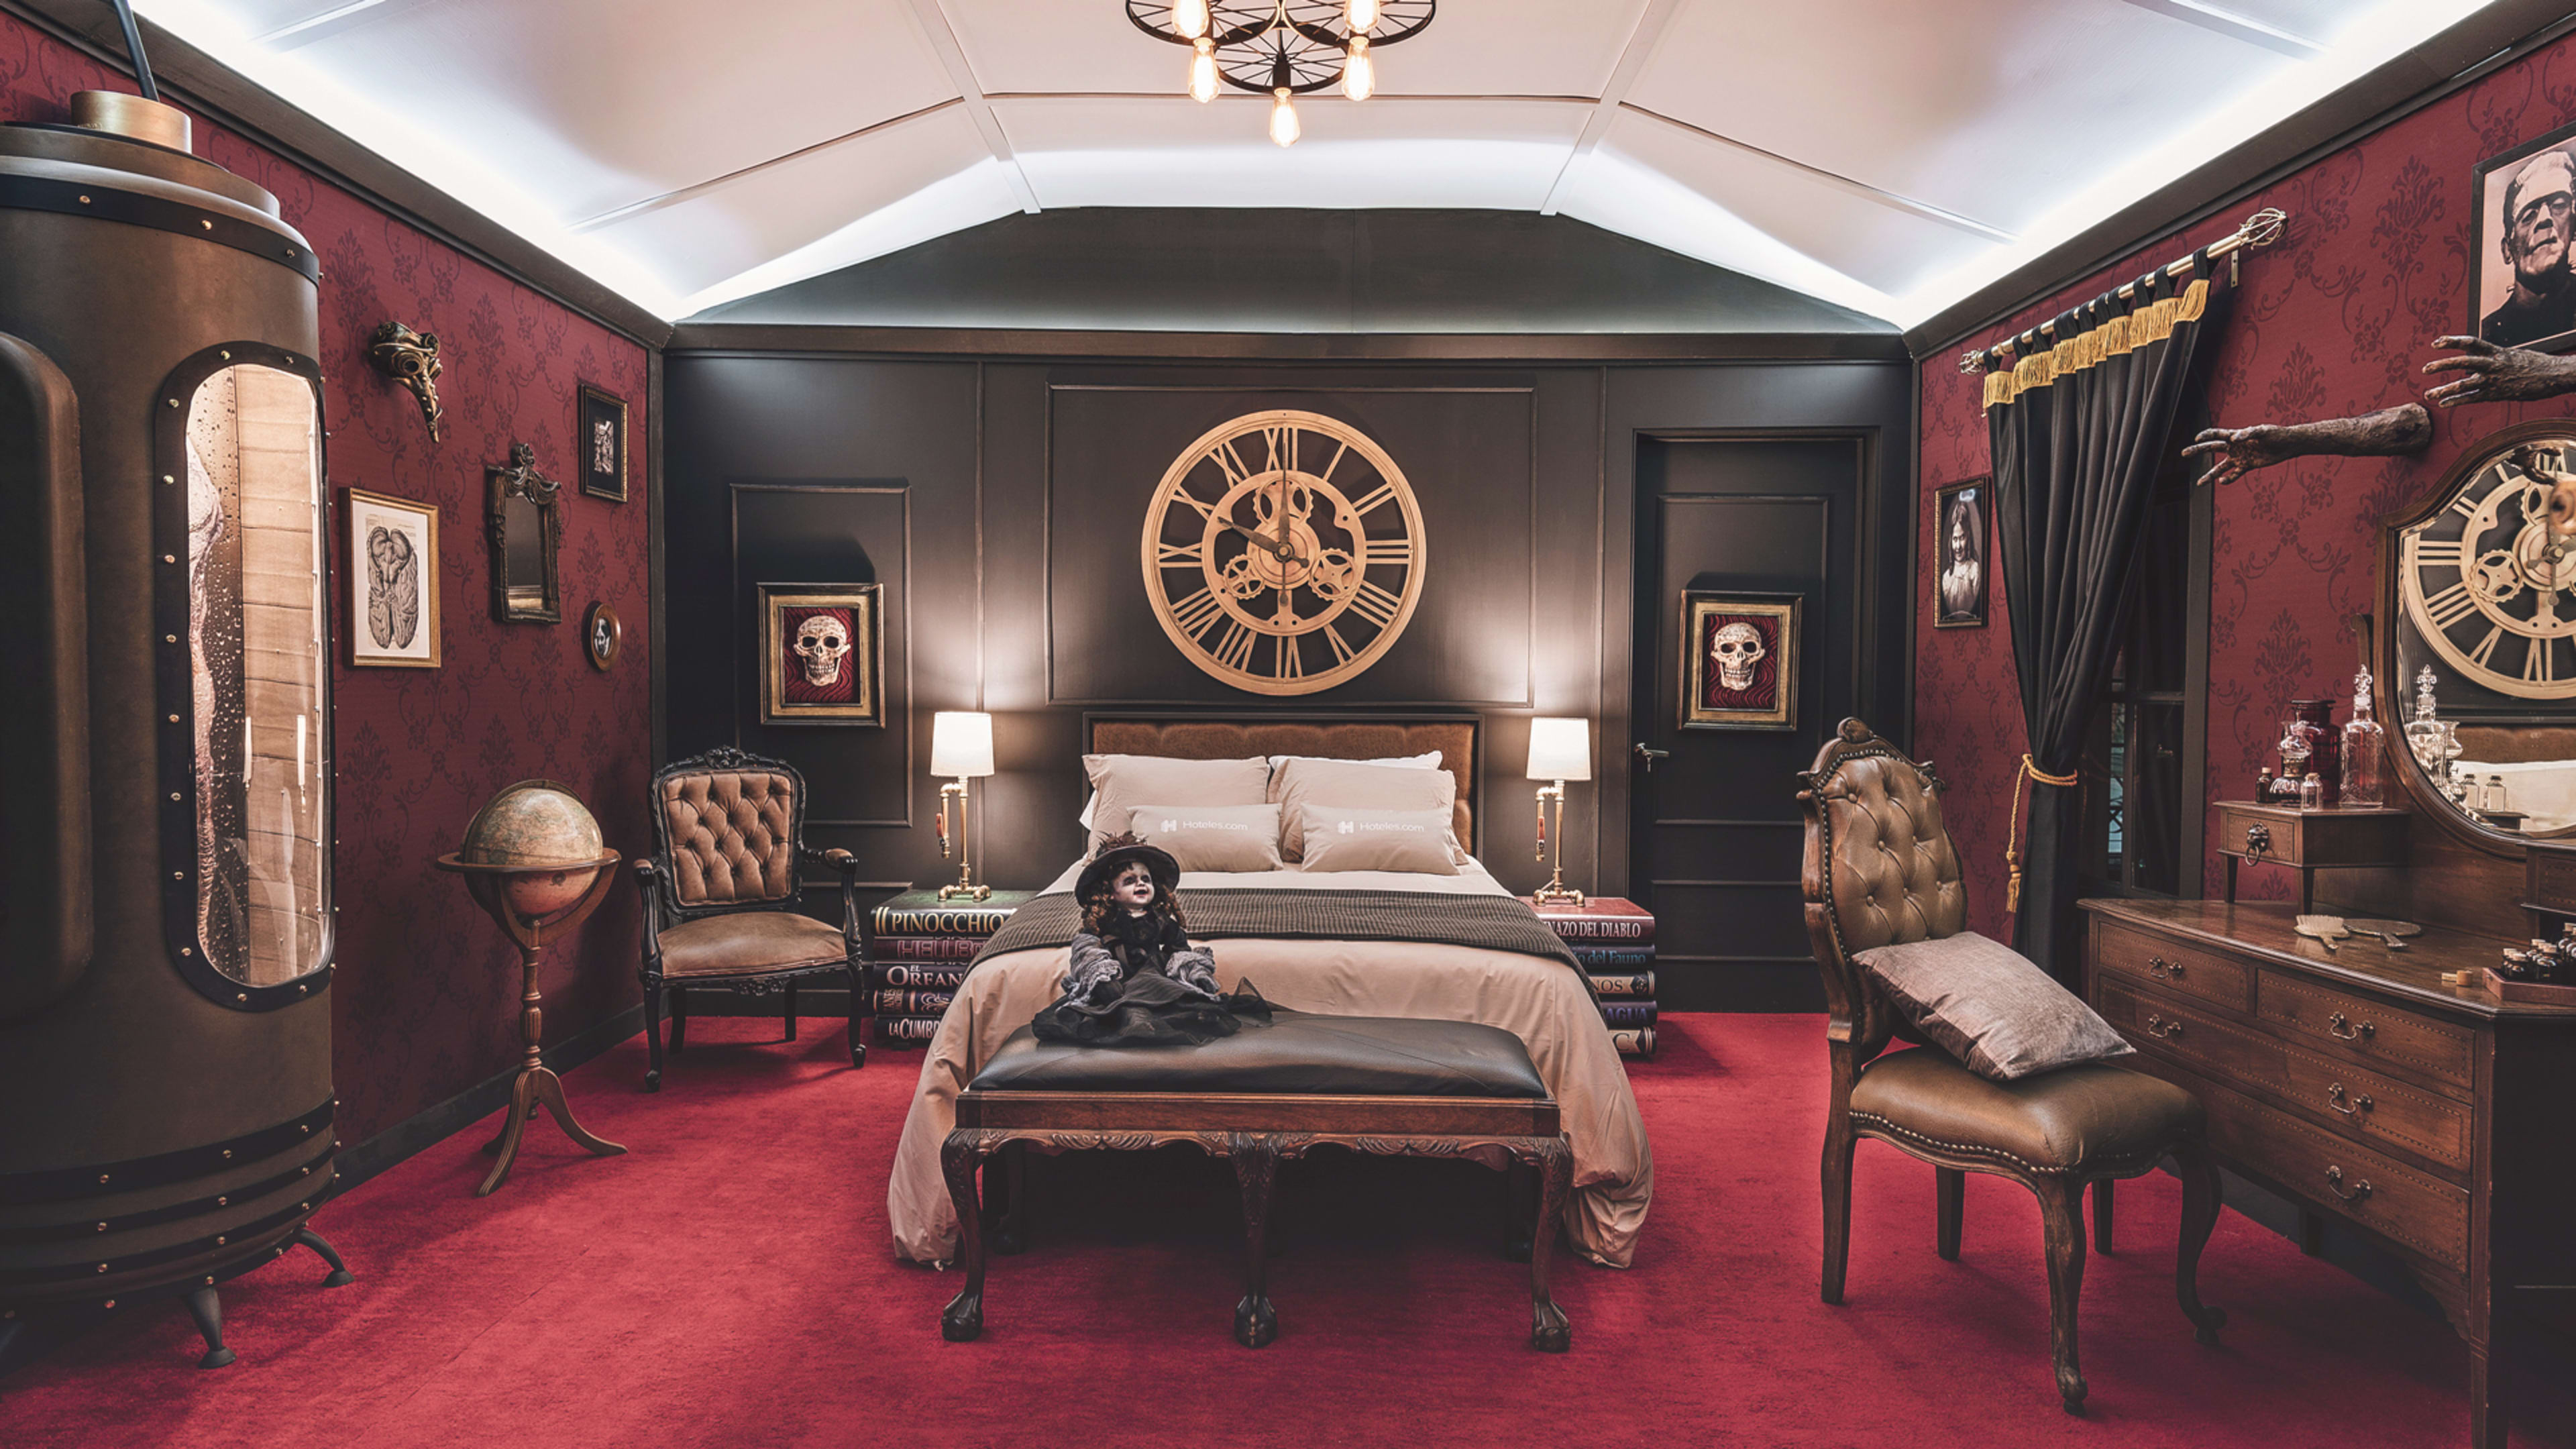 Book this monstrous Guillermo del Toro-inspired suite on Hotels.com—or else